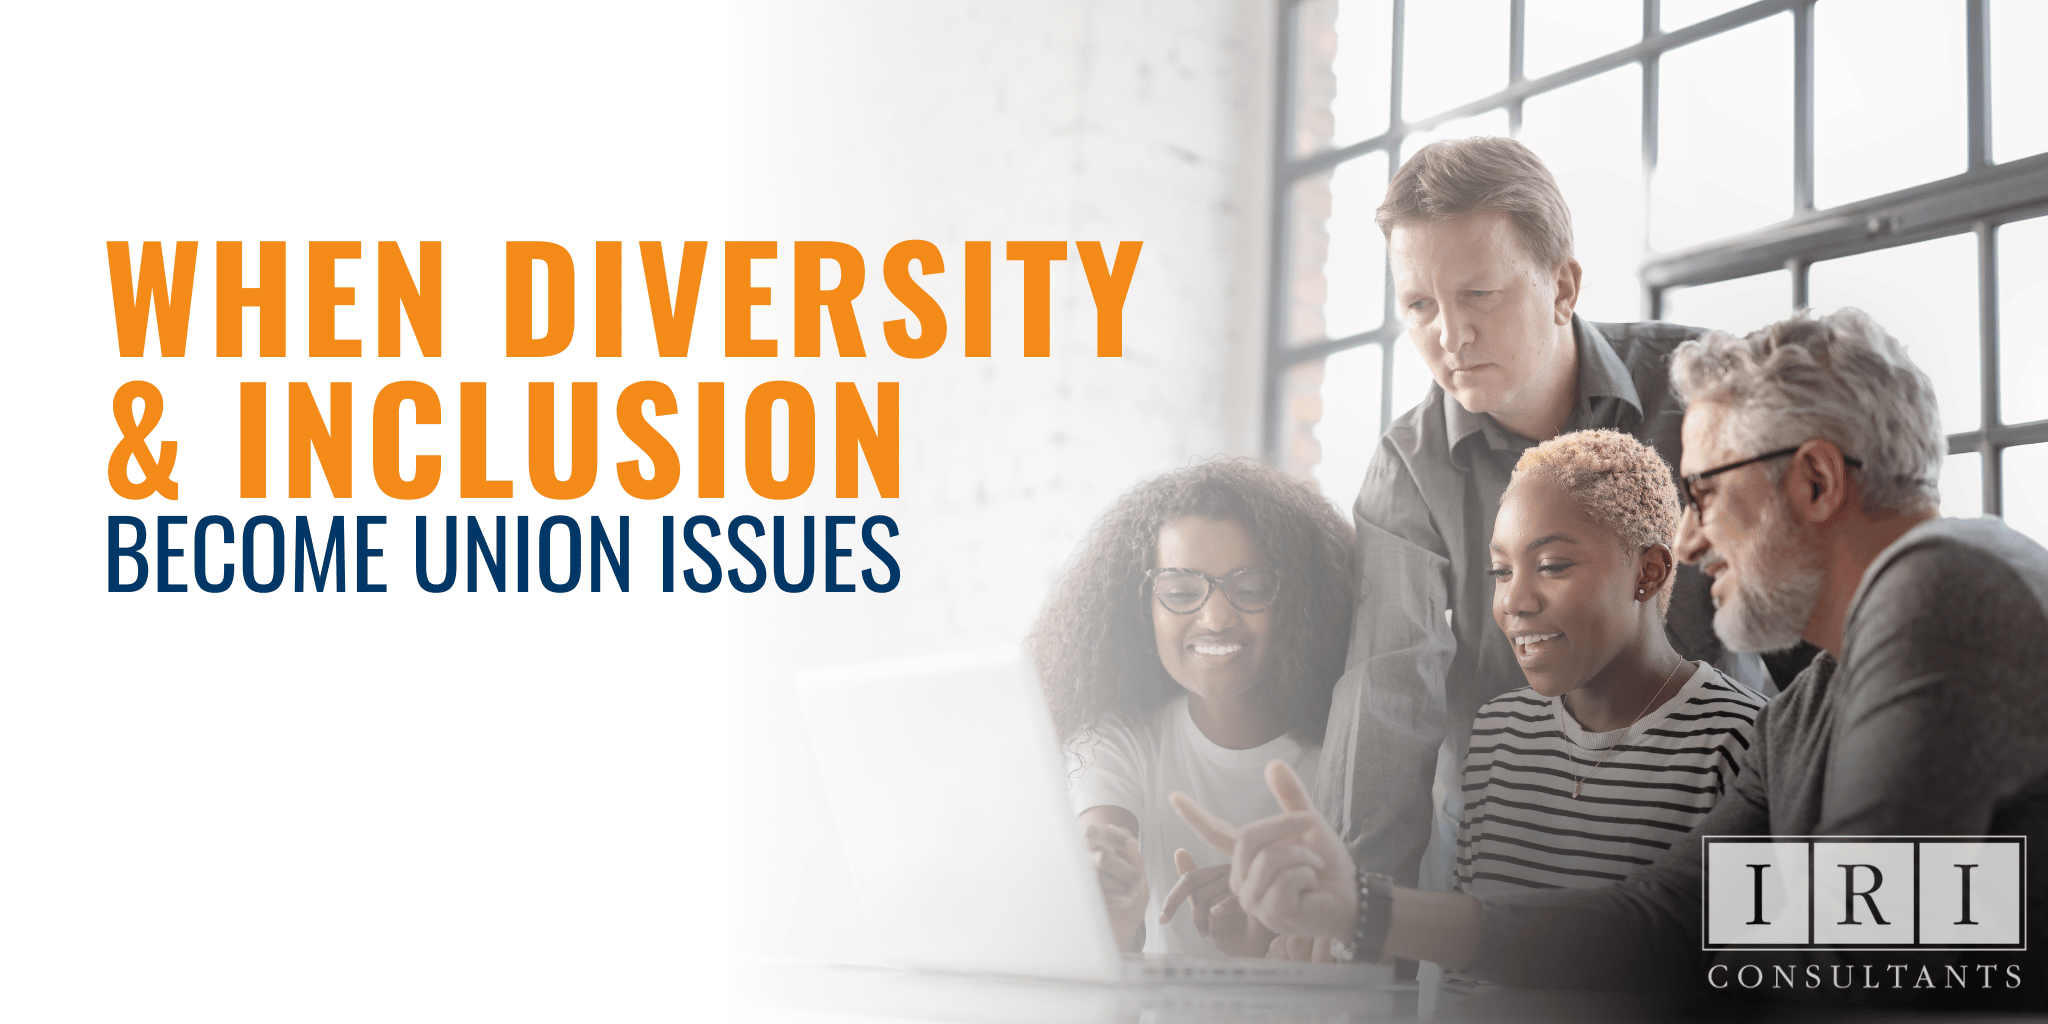 When Diversity & Inclusion Become Union Issues